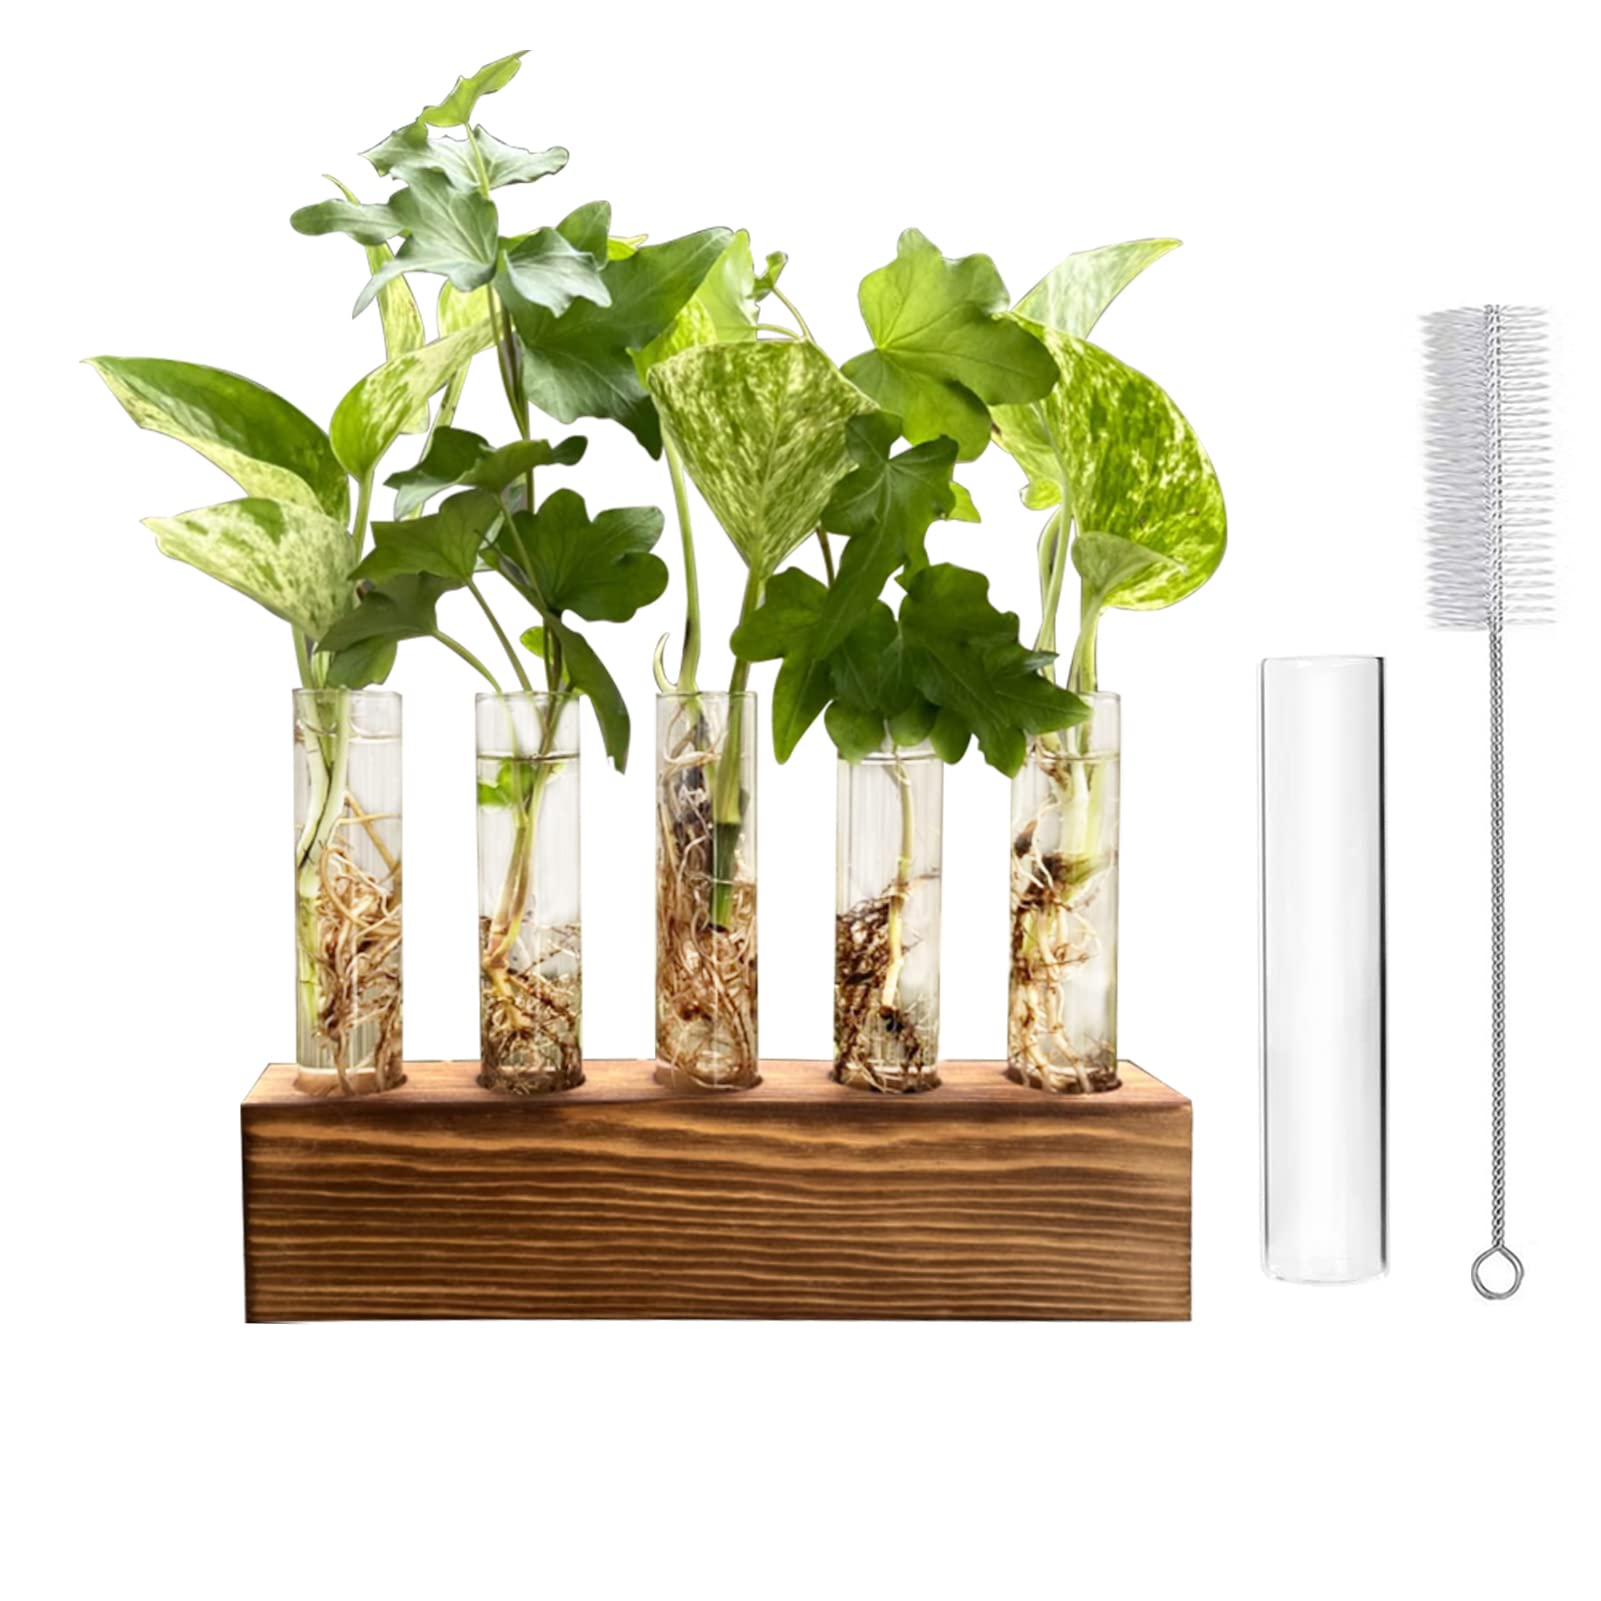 LitiVibecho Plant Propagation Station, Wooden Stand with 5 Glass Tubes, Desktop Plant Terrarium for Home Office Garden Decoration,Propagation Tube,Plant Propagation Tube,